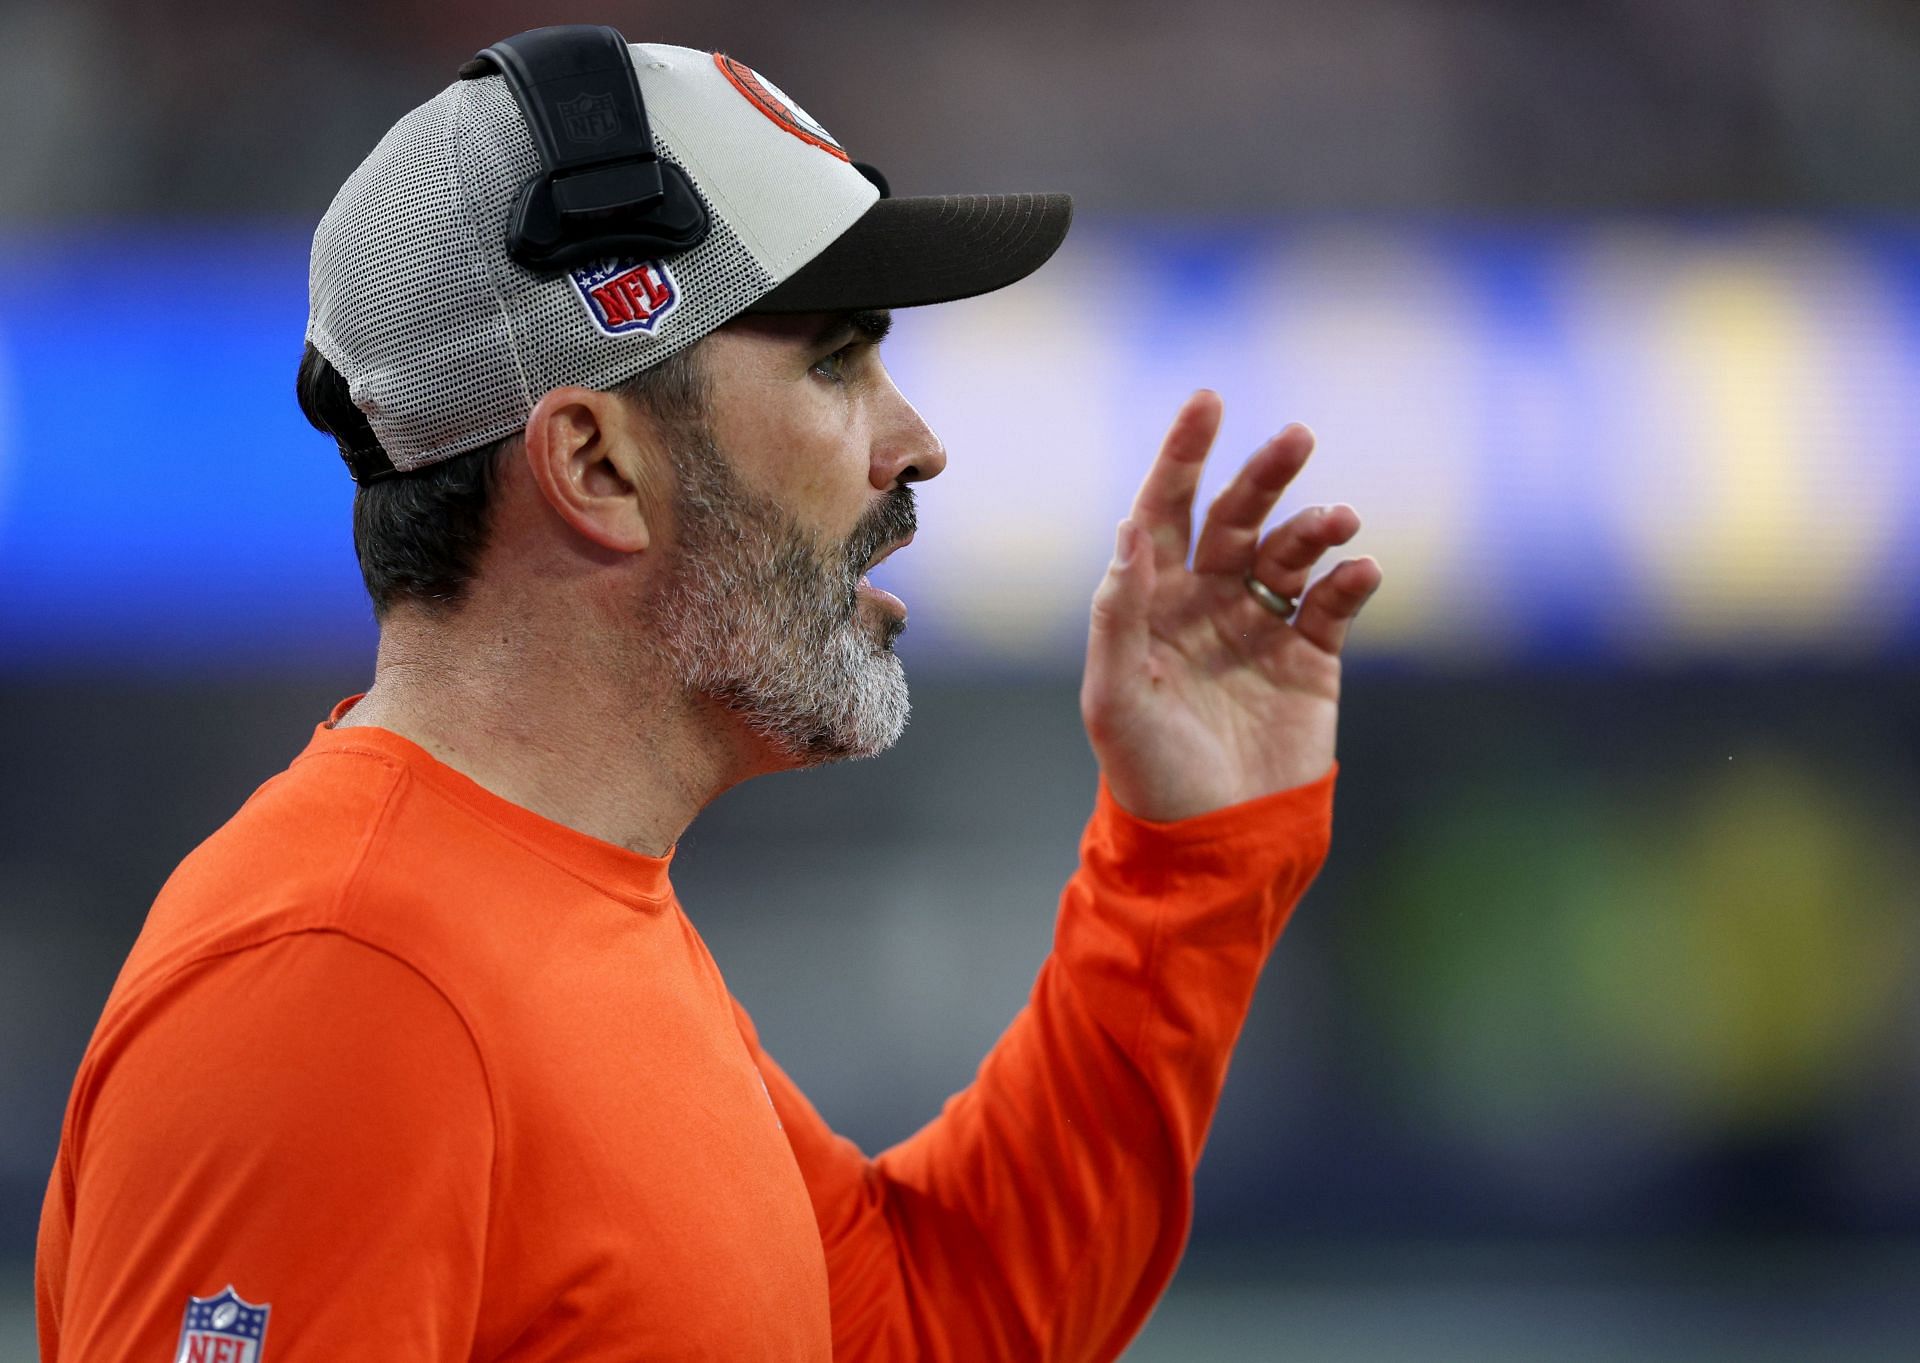 5 NFL head coaches who make less money than Jim Harbaugh's reported 55